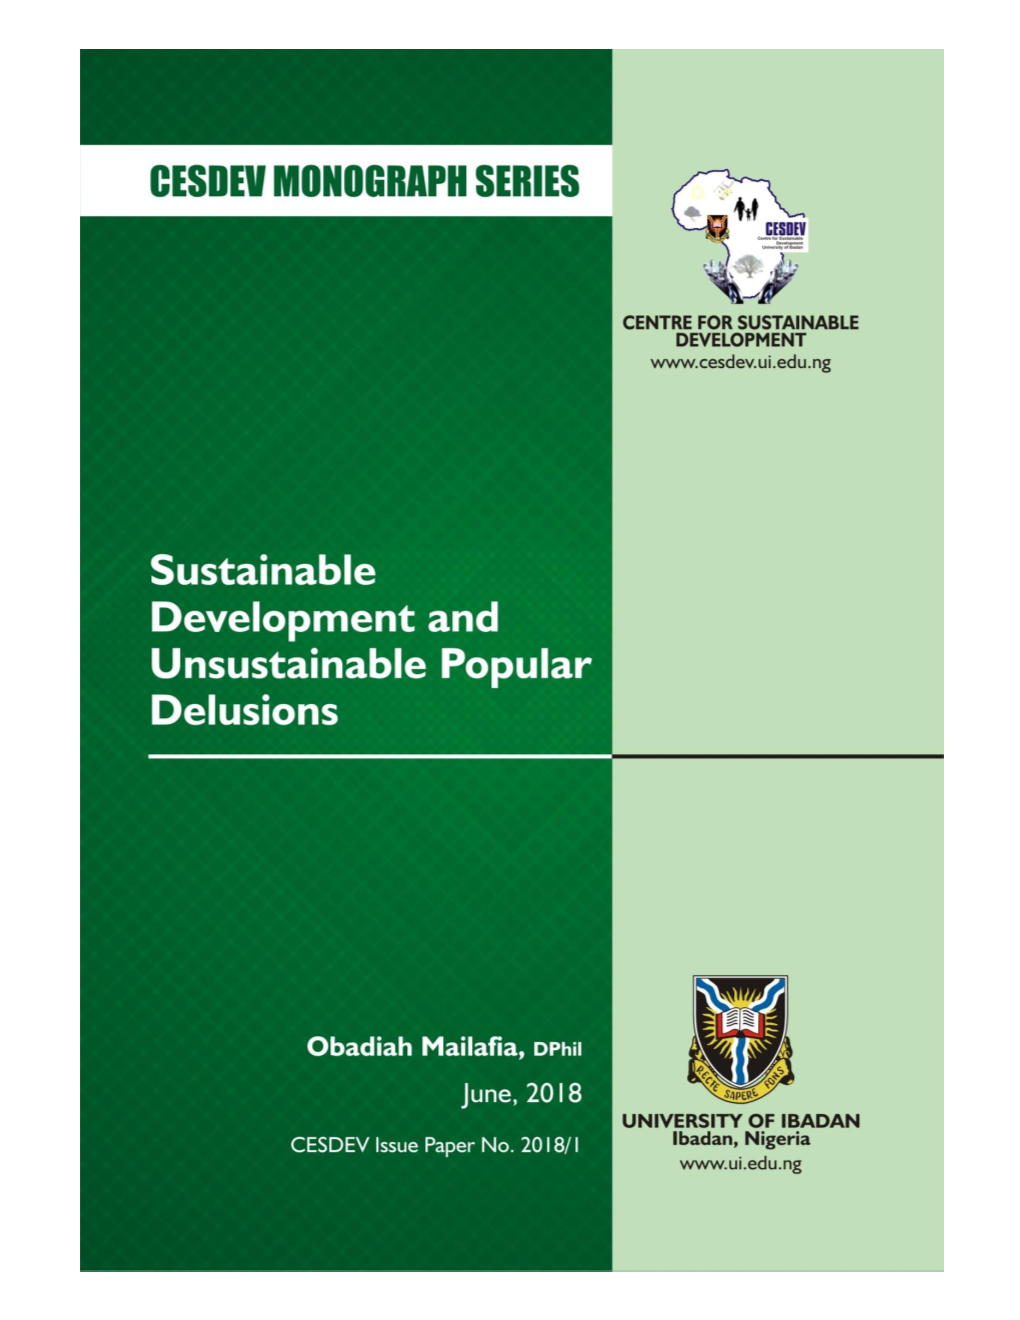 Sustainable Development and Unsustainable Popular Delusions